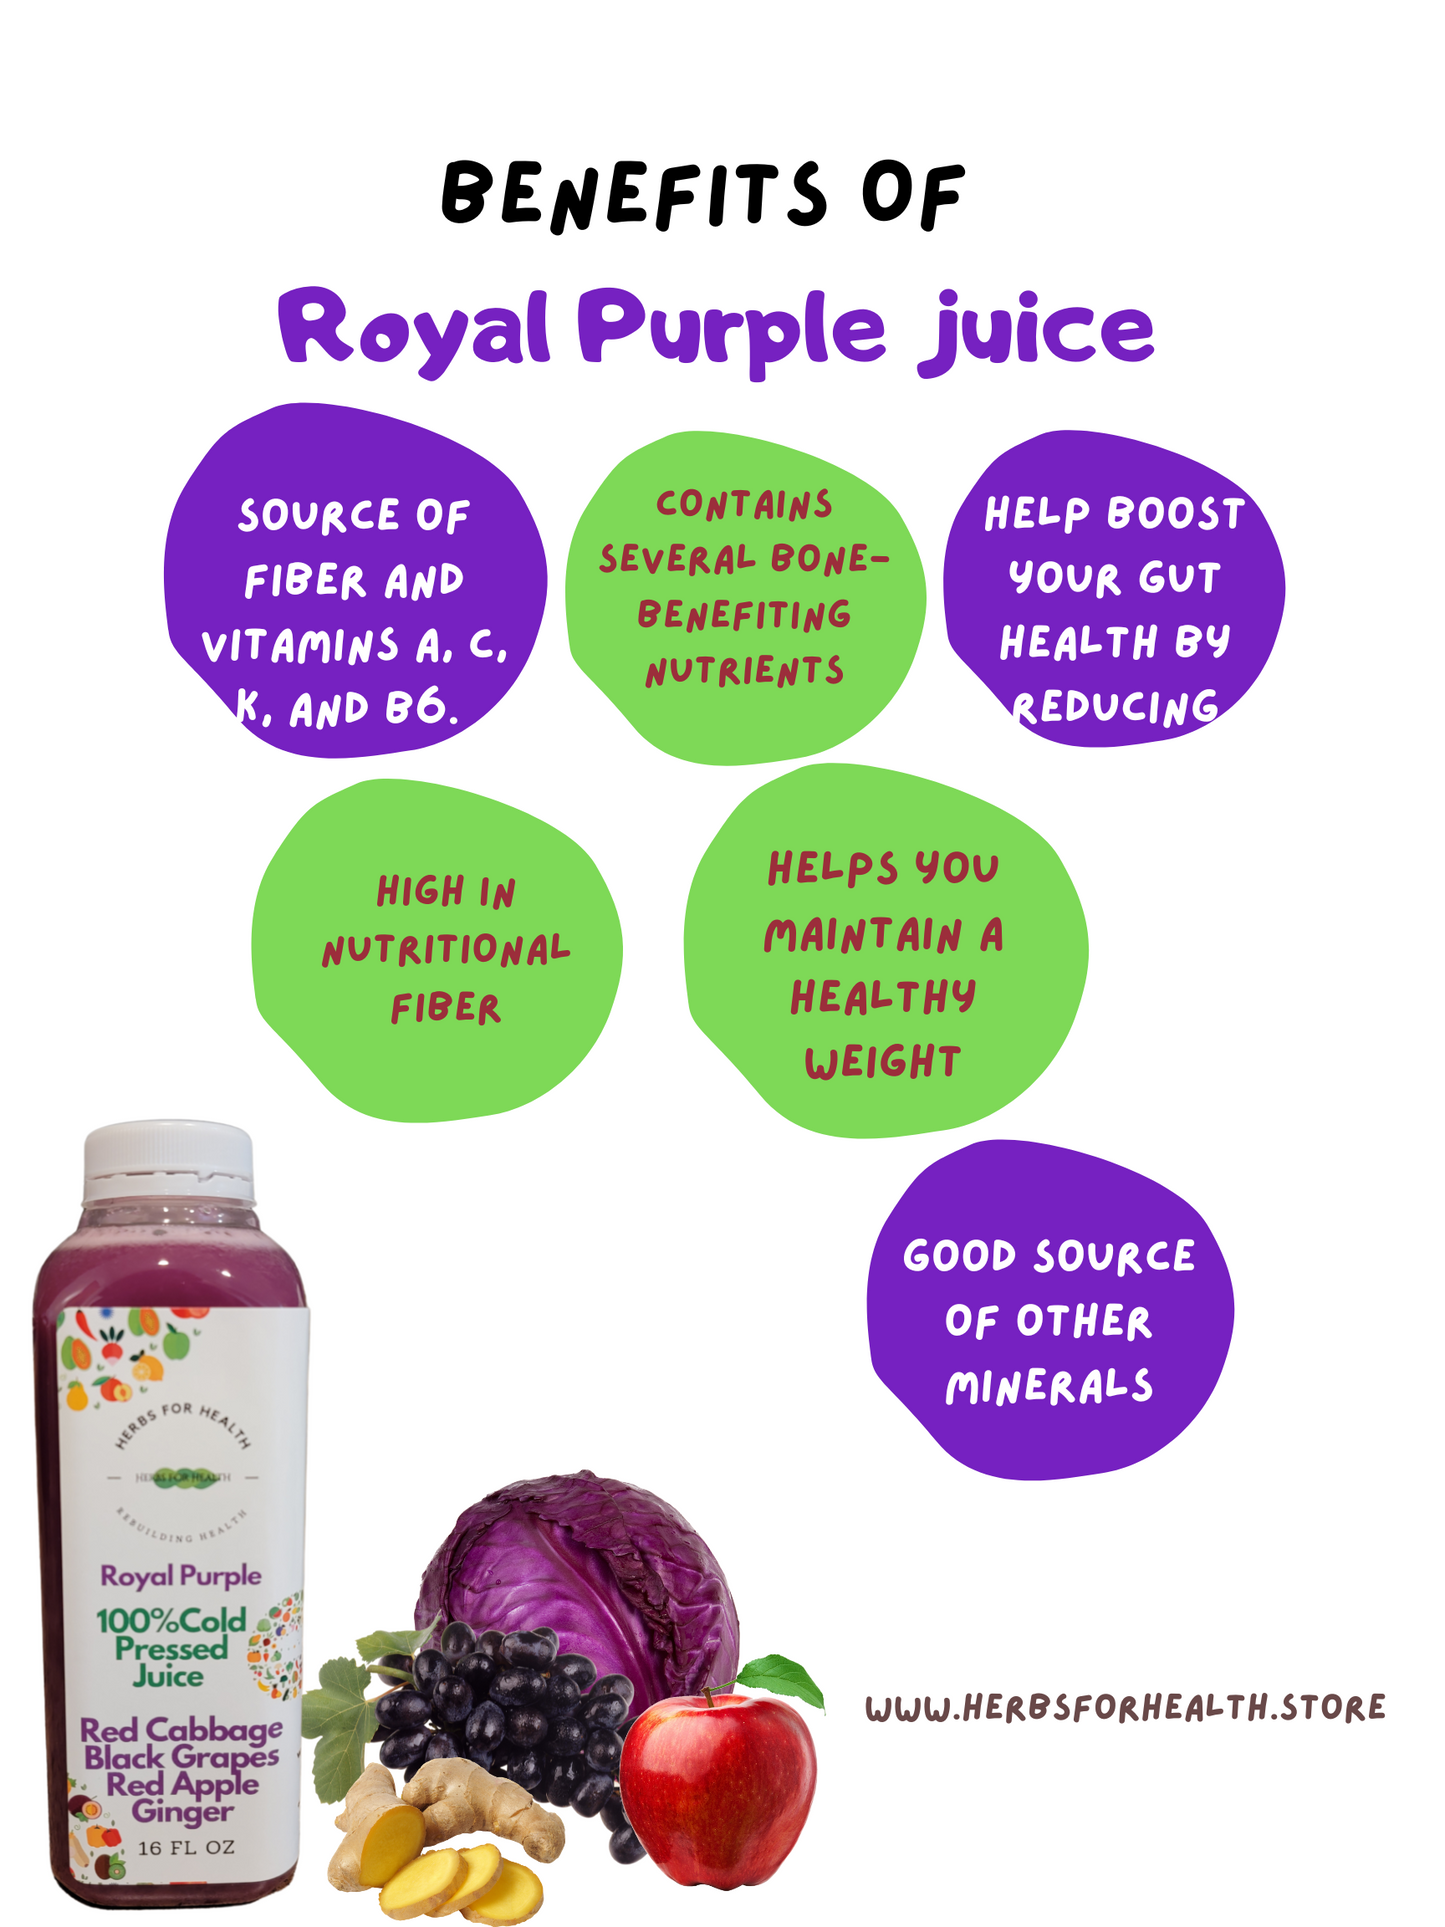 Royal Purple Cold Pressed Juice - Herbs For Health